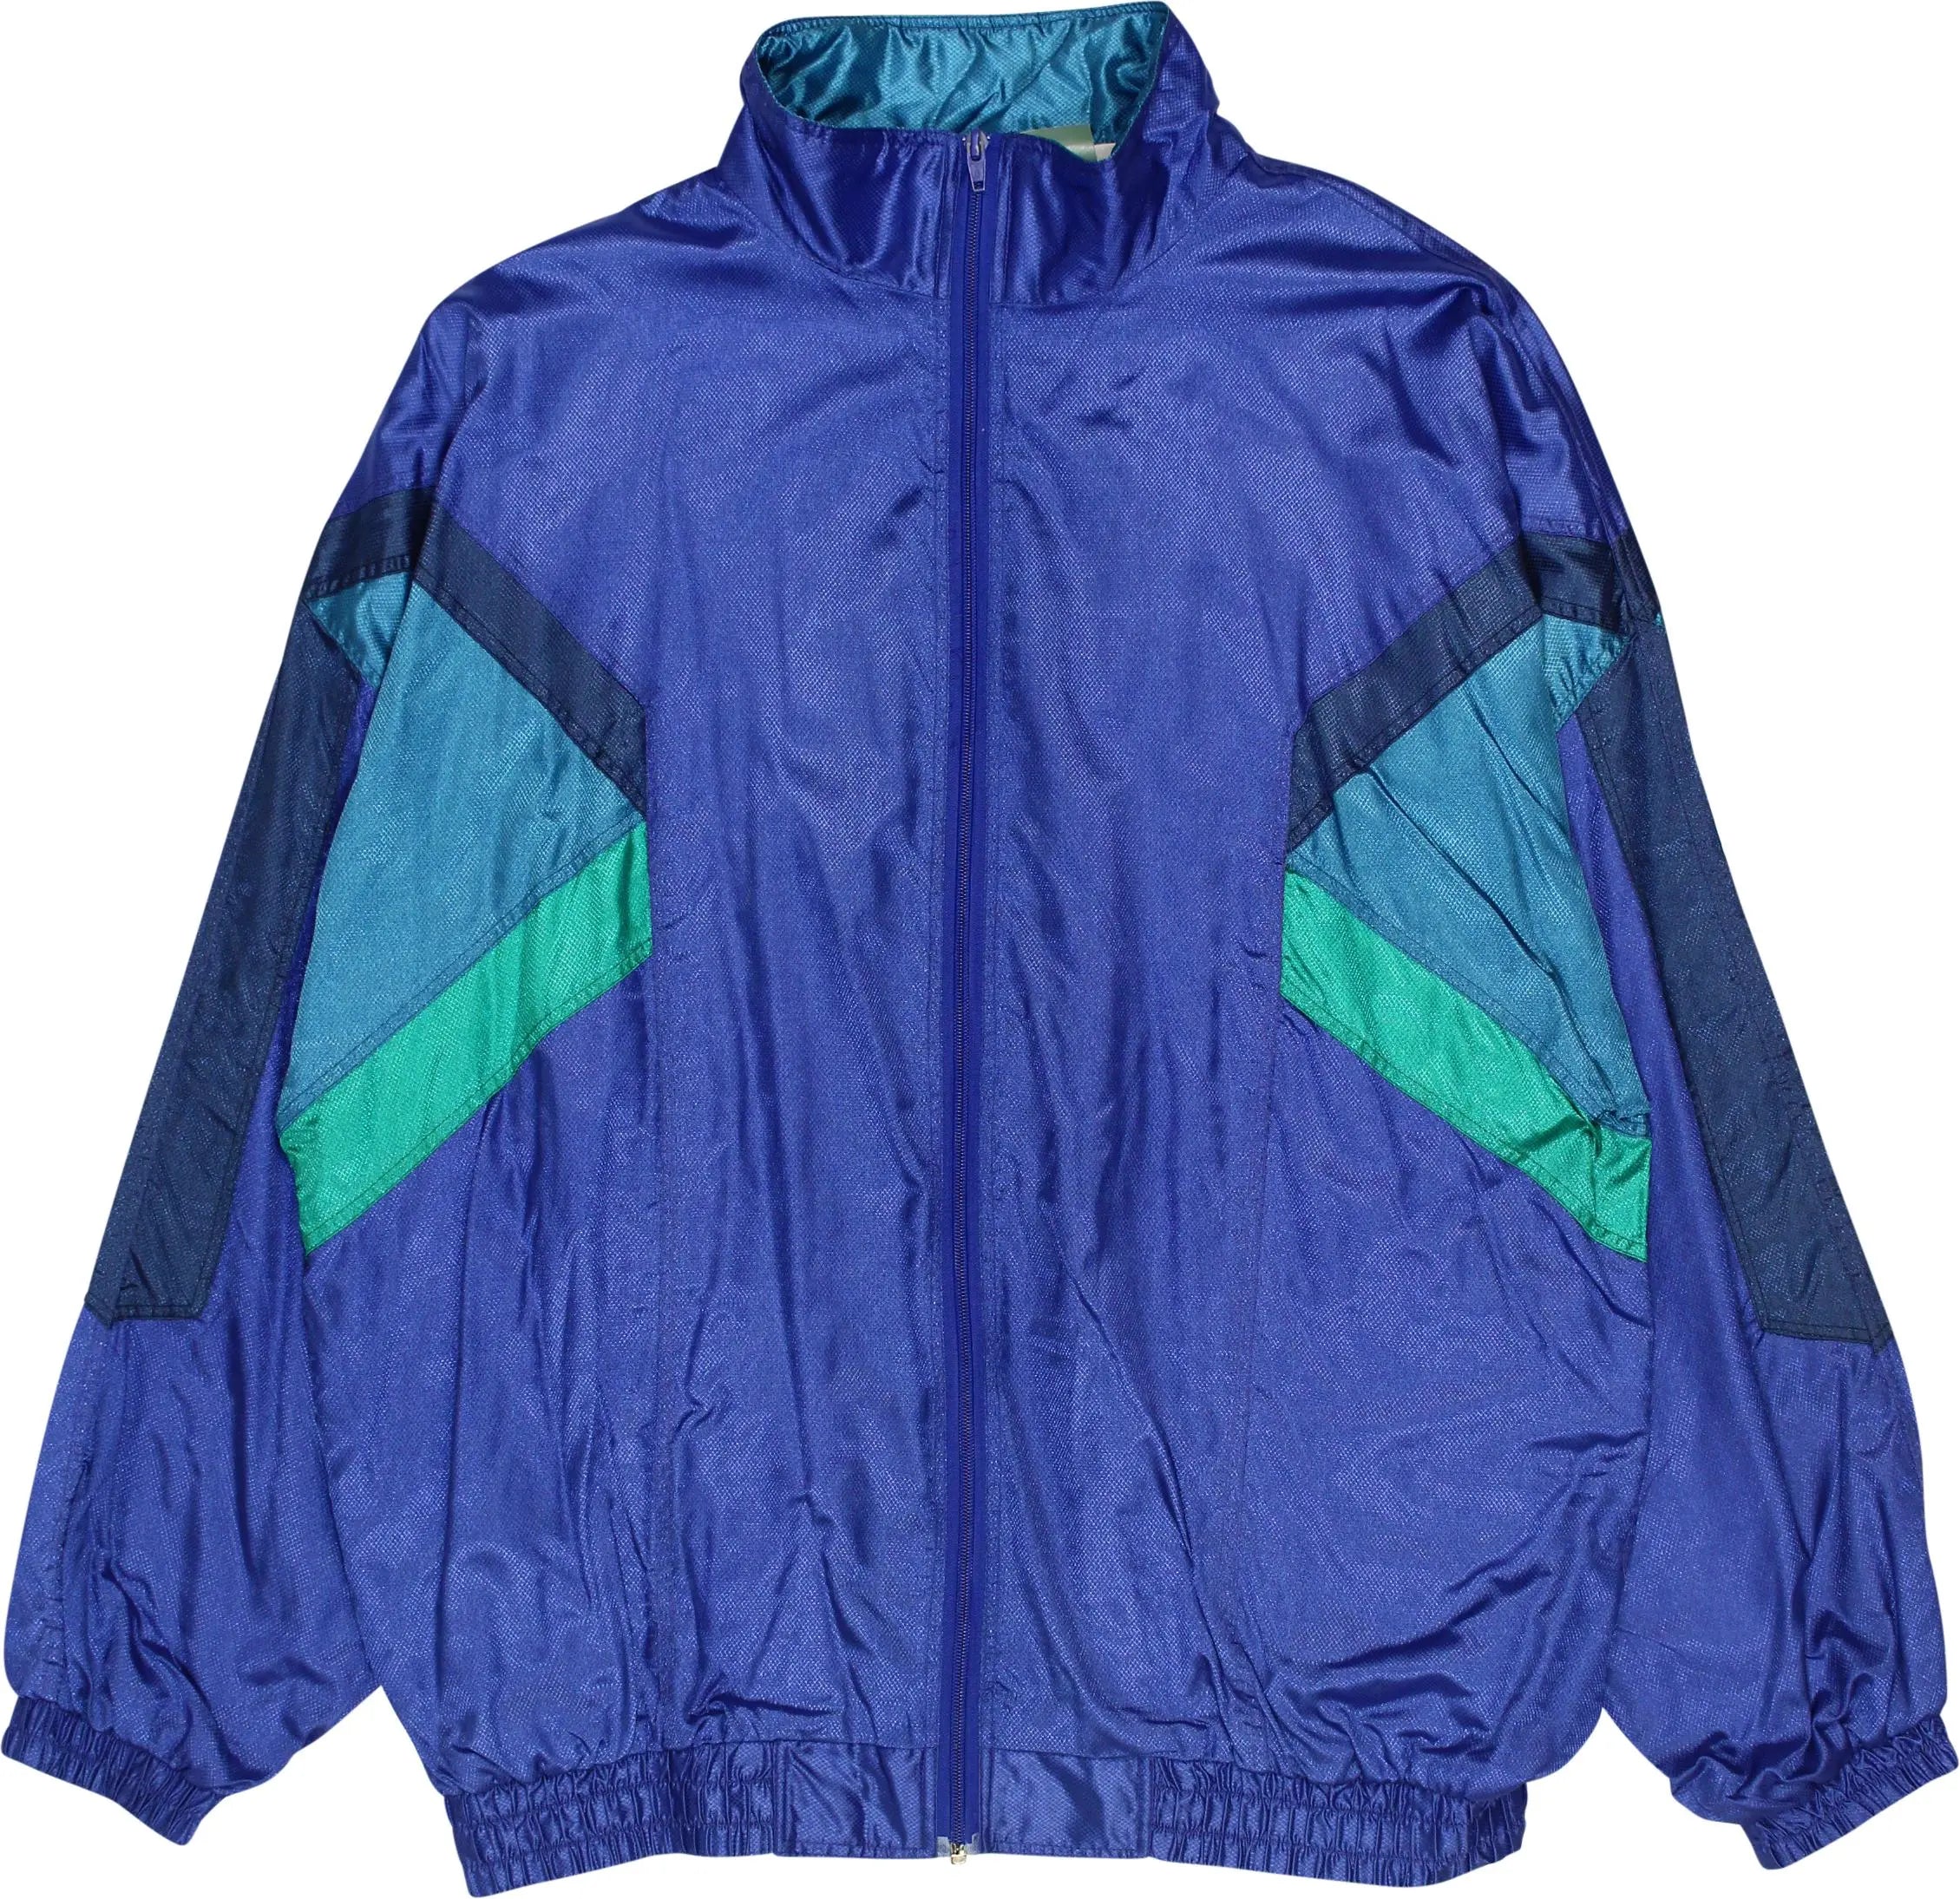 Unknown - 90s Windbreaker- ThriftTale.com - Vintage and second handclothing